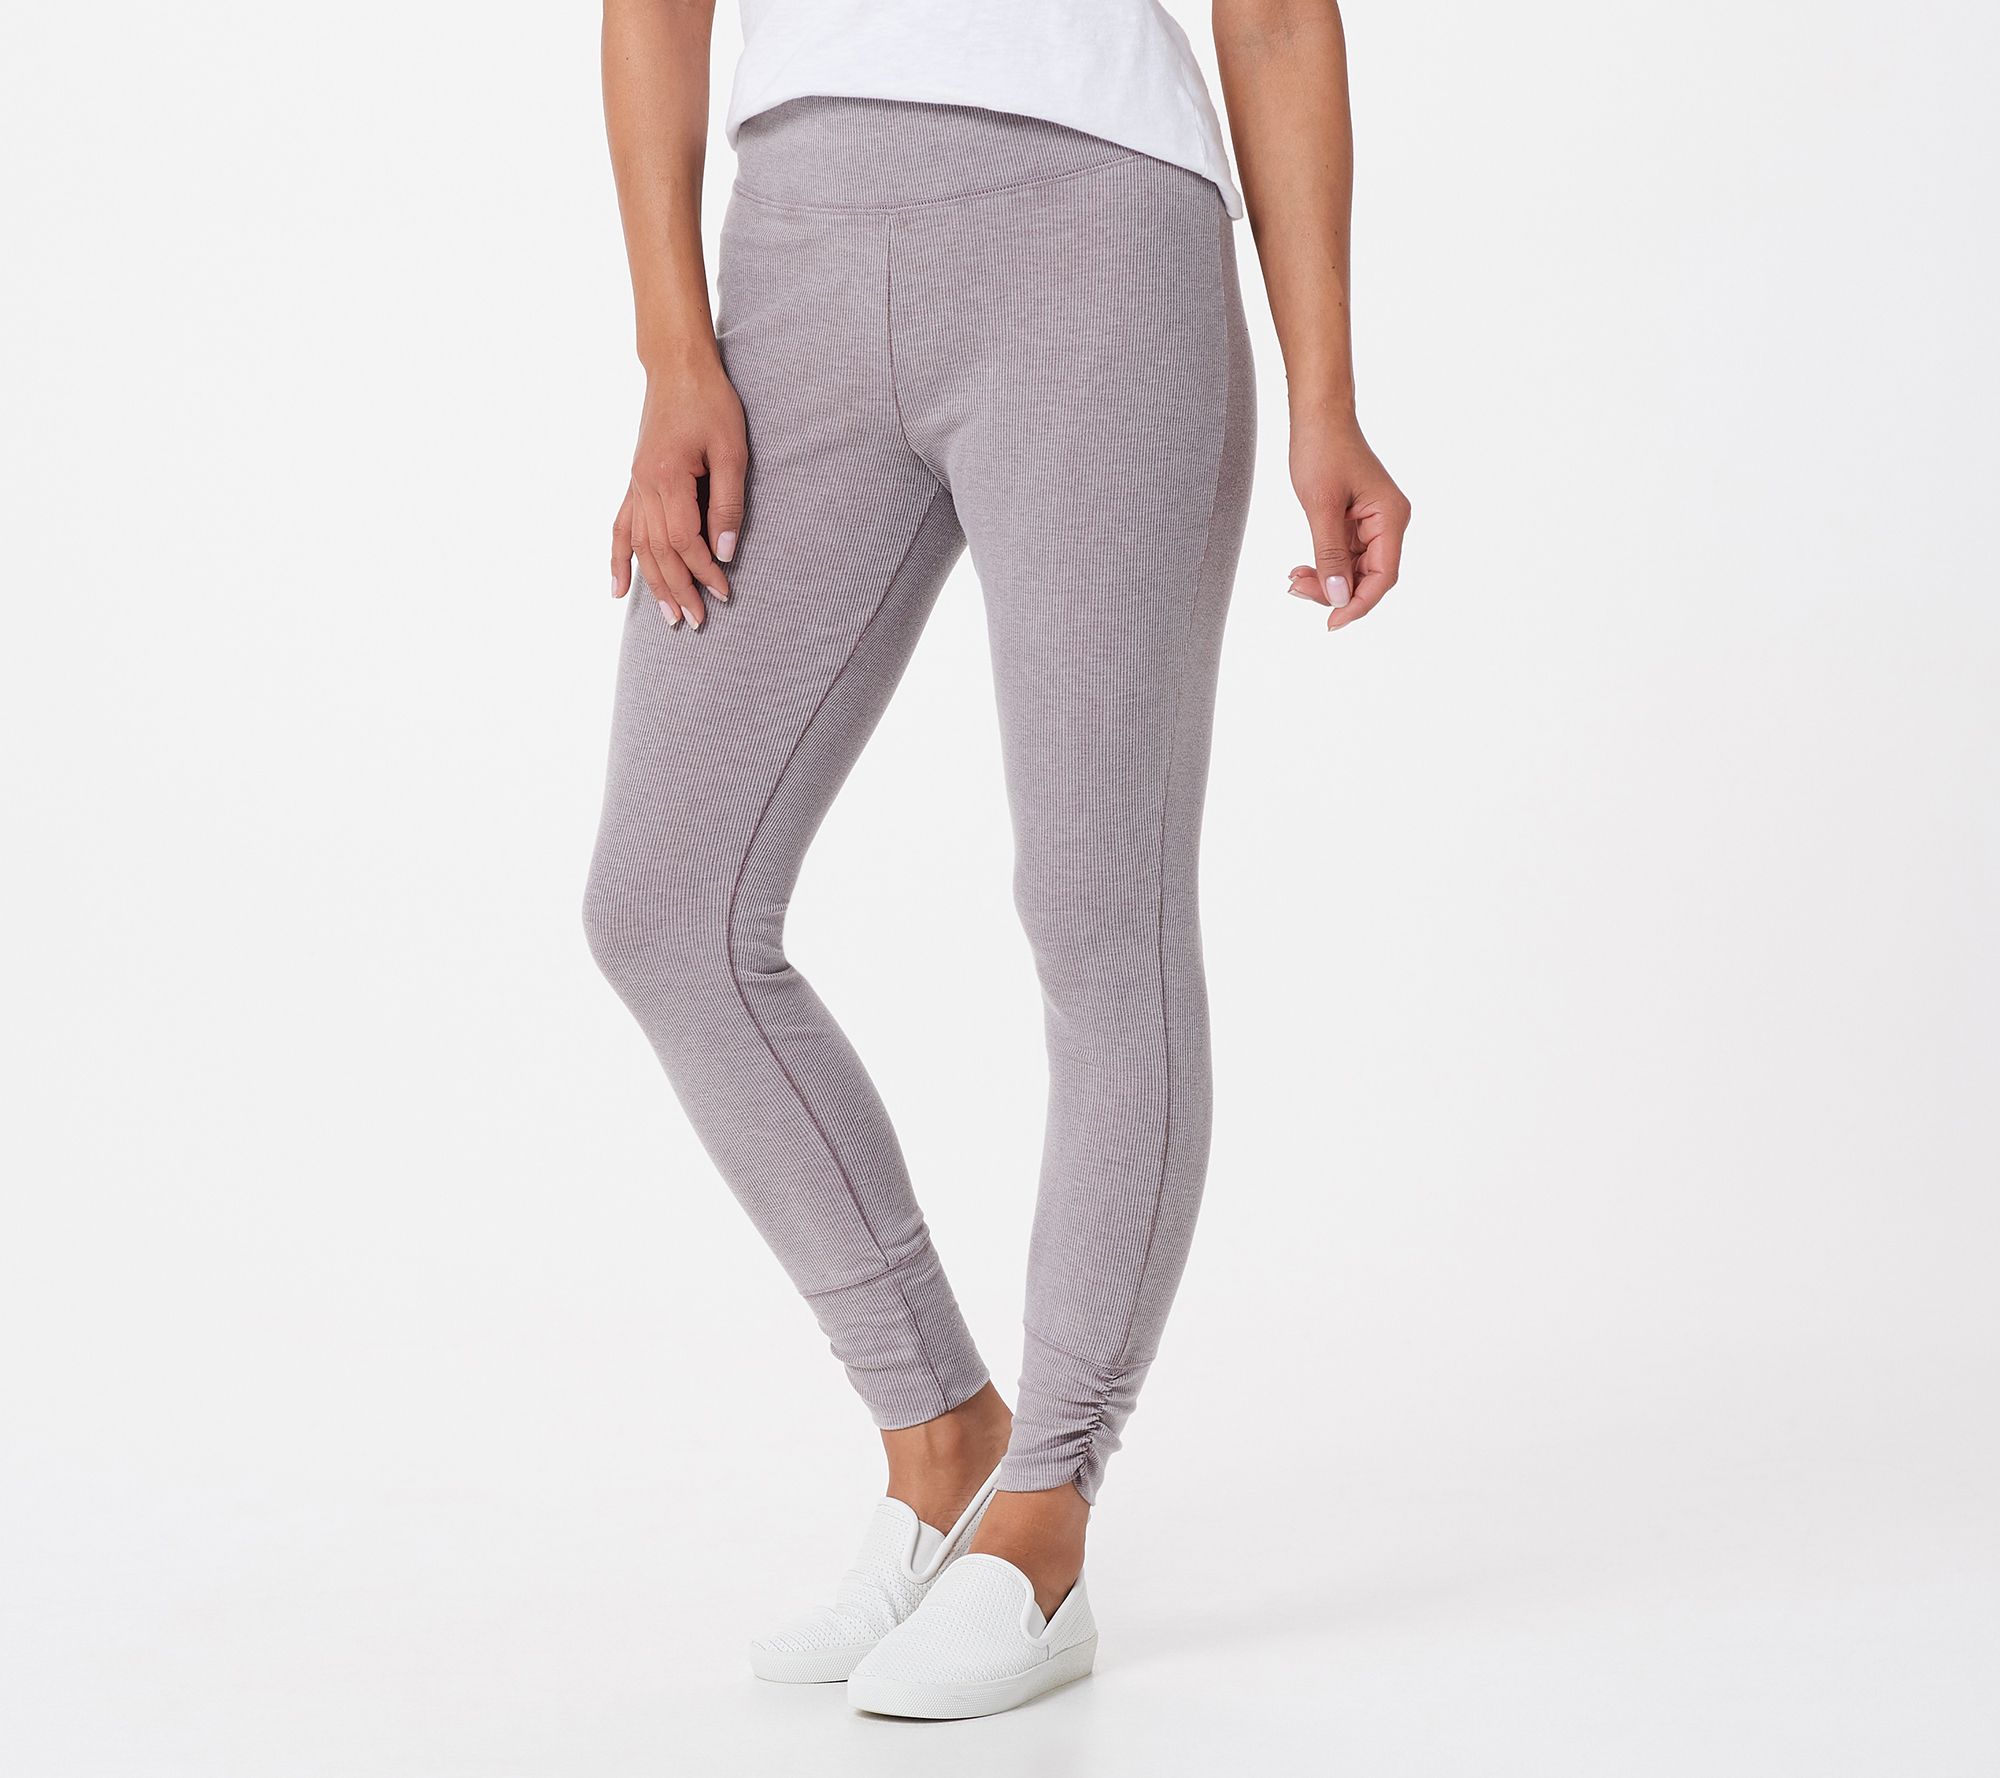 Women with Control Leggings are on sale at QVC today